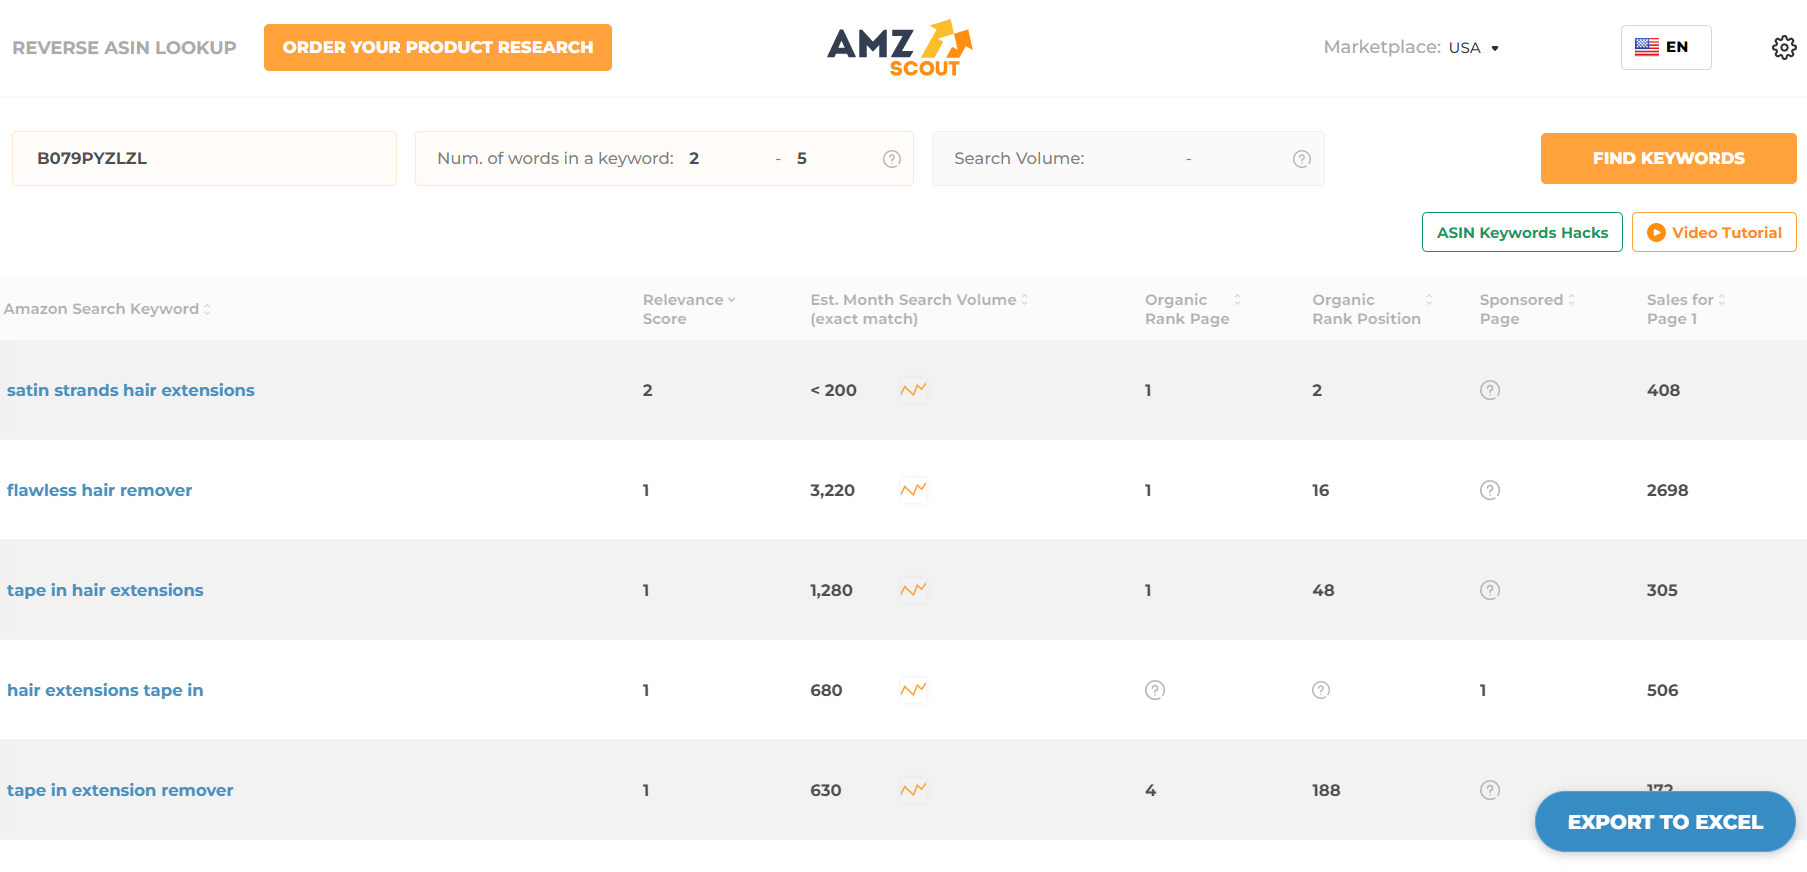 amz-scout-product-data-on-display